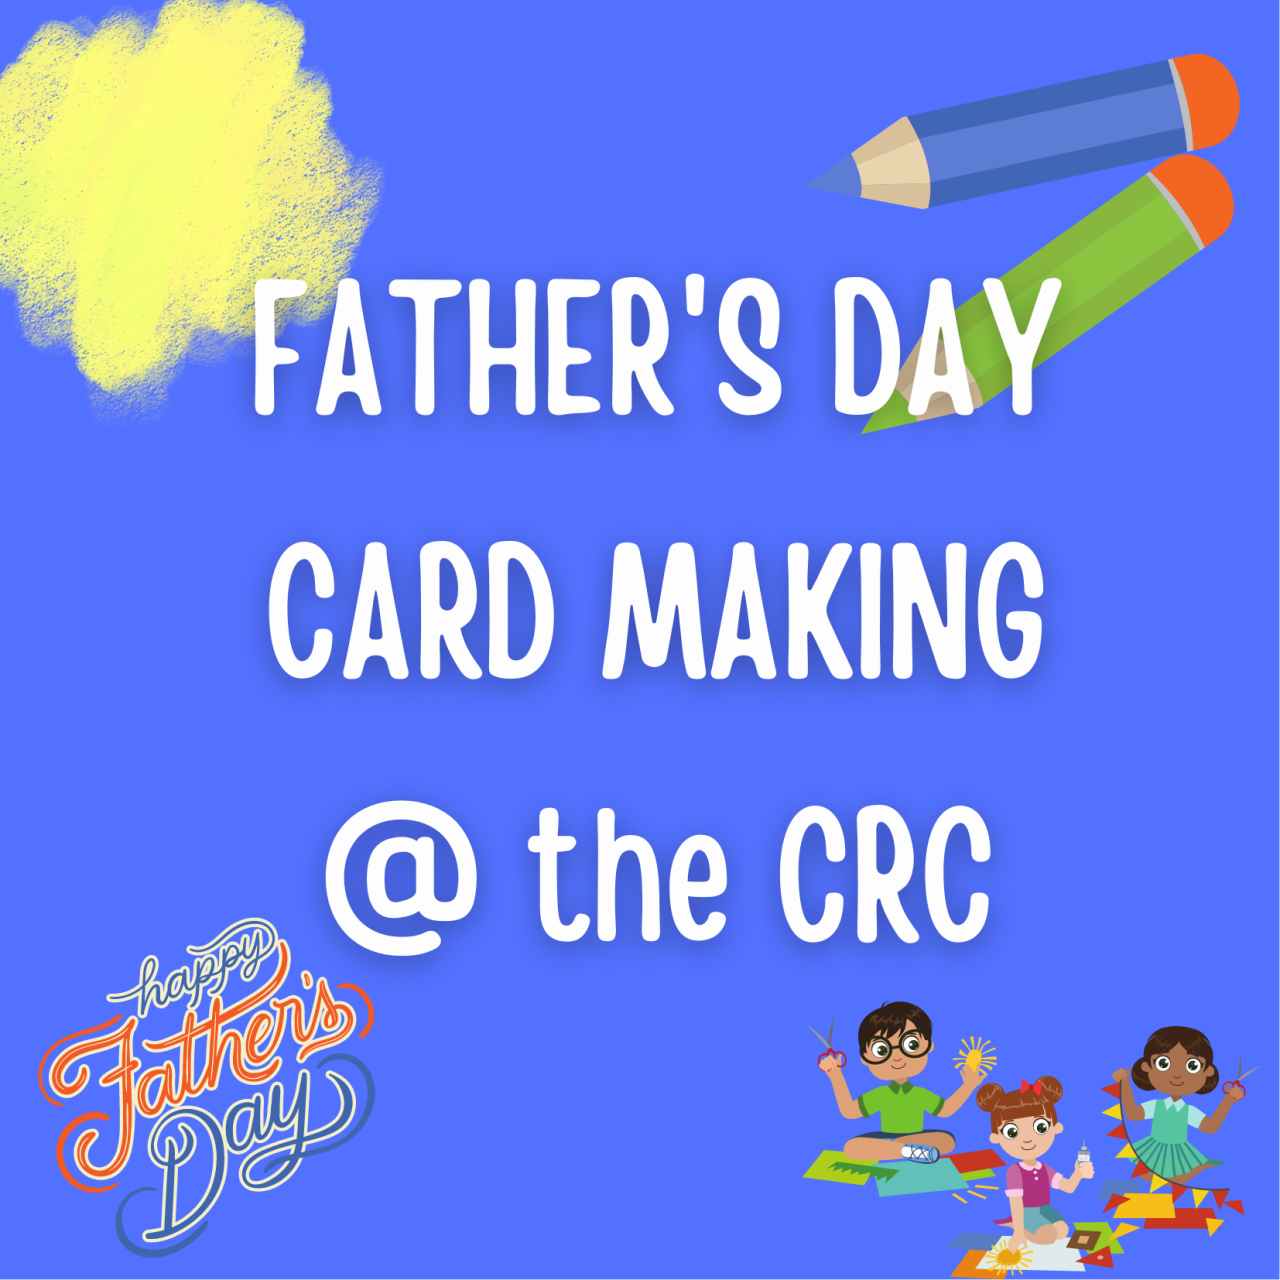 Father's Day Card Making @ the CRC